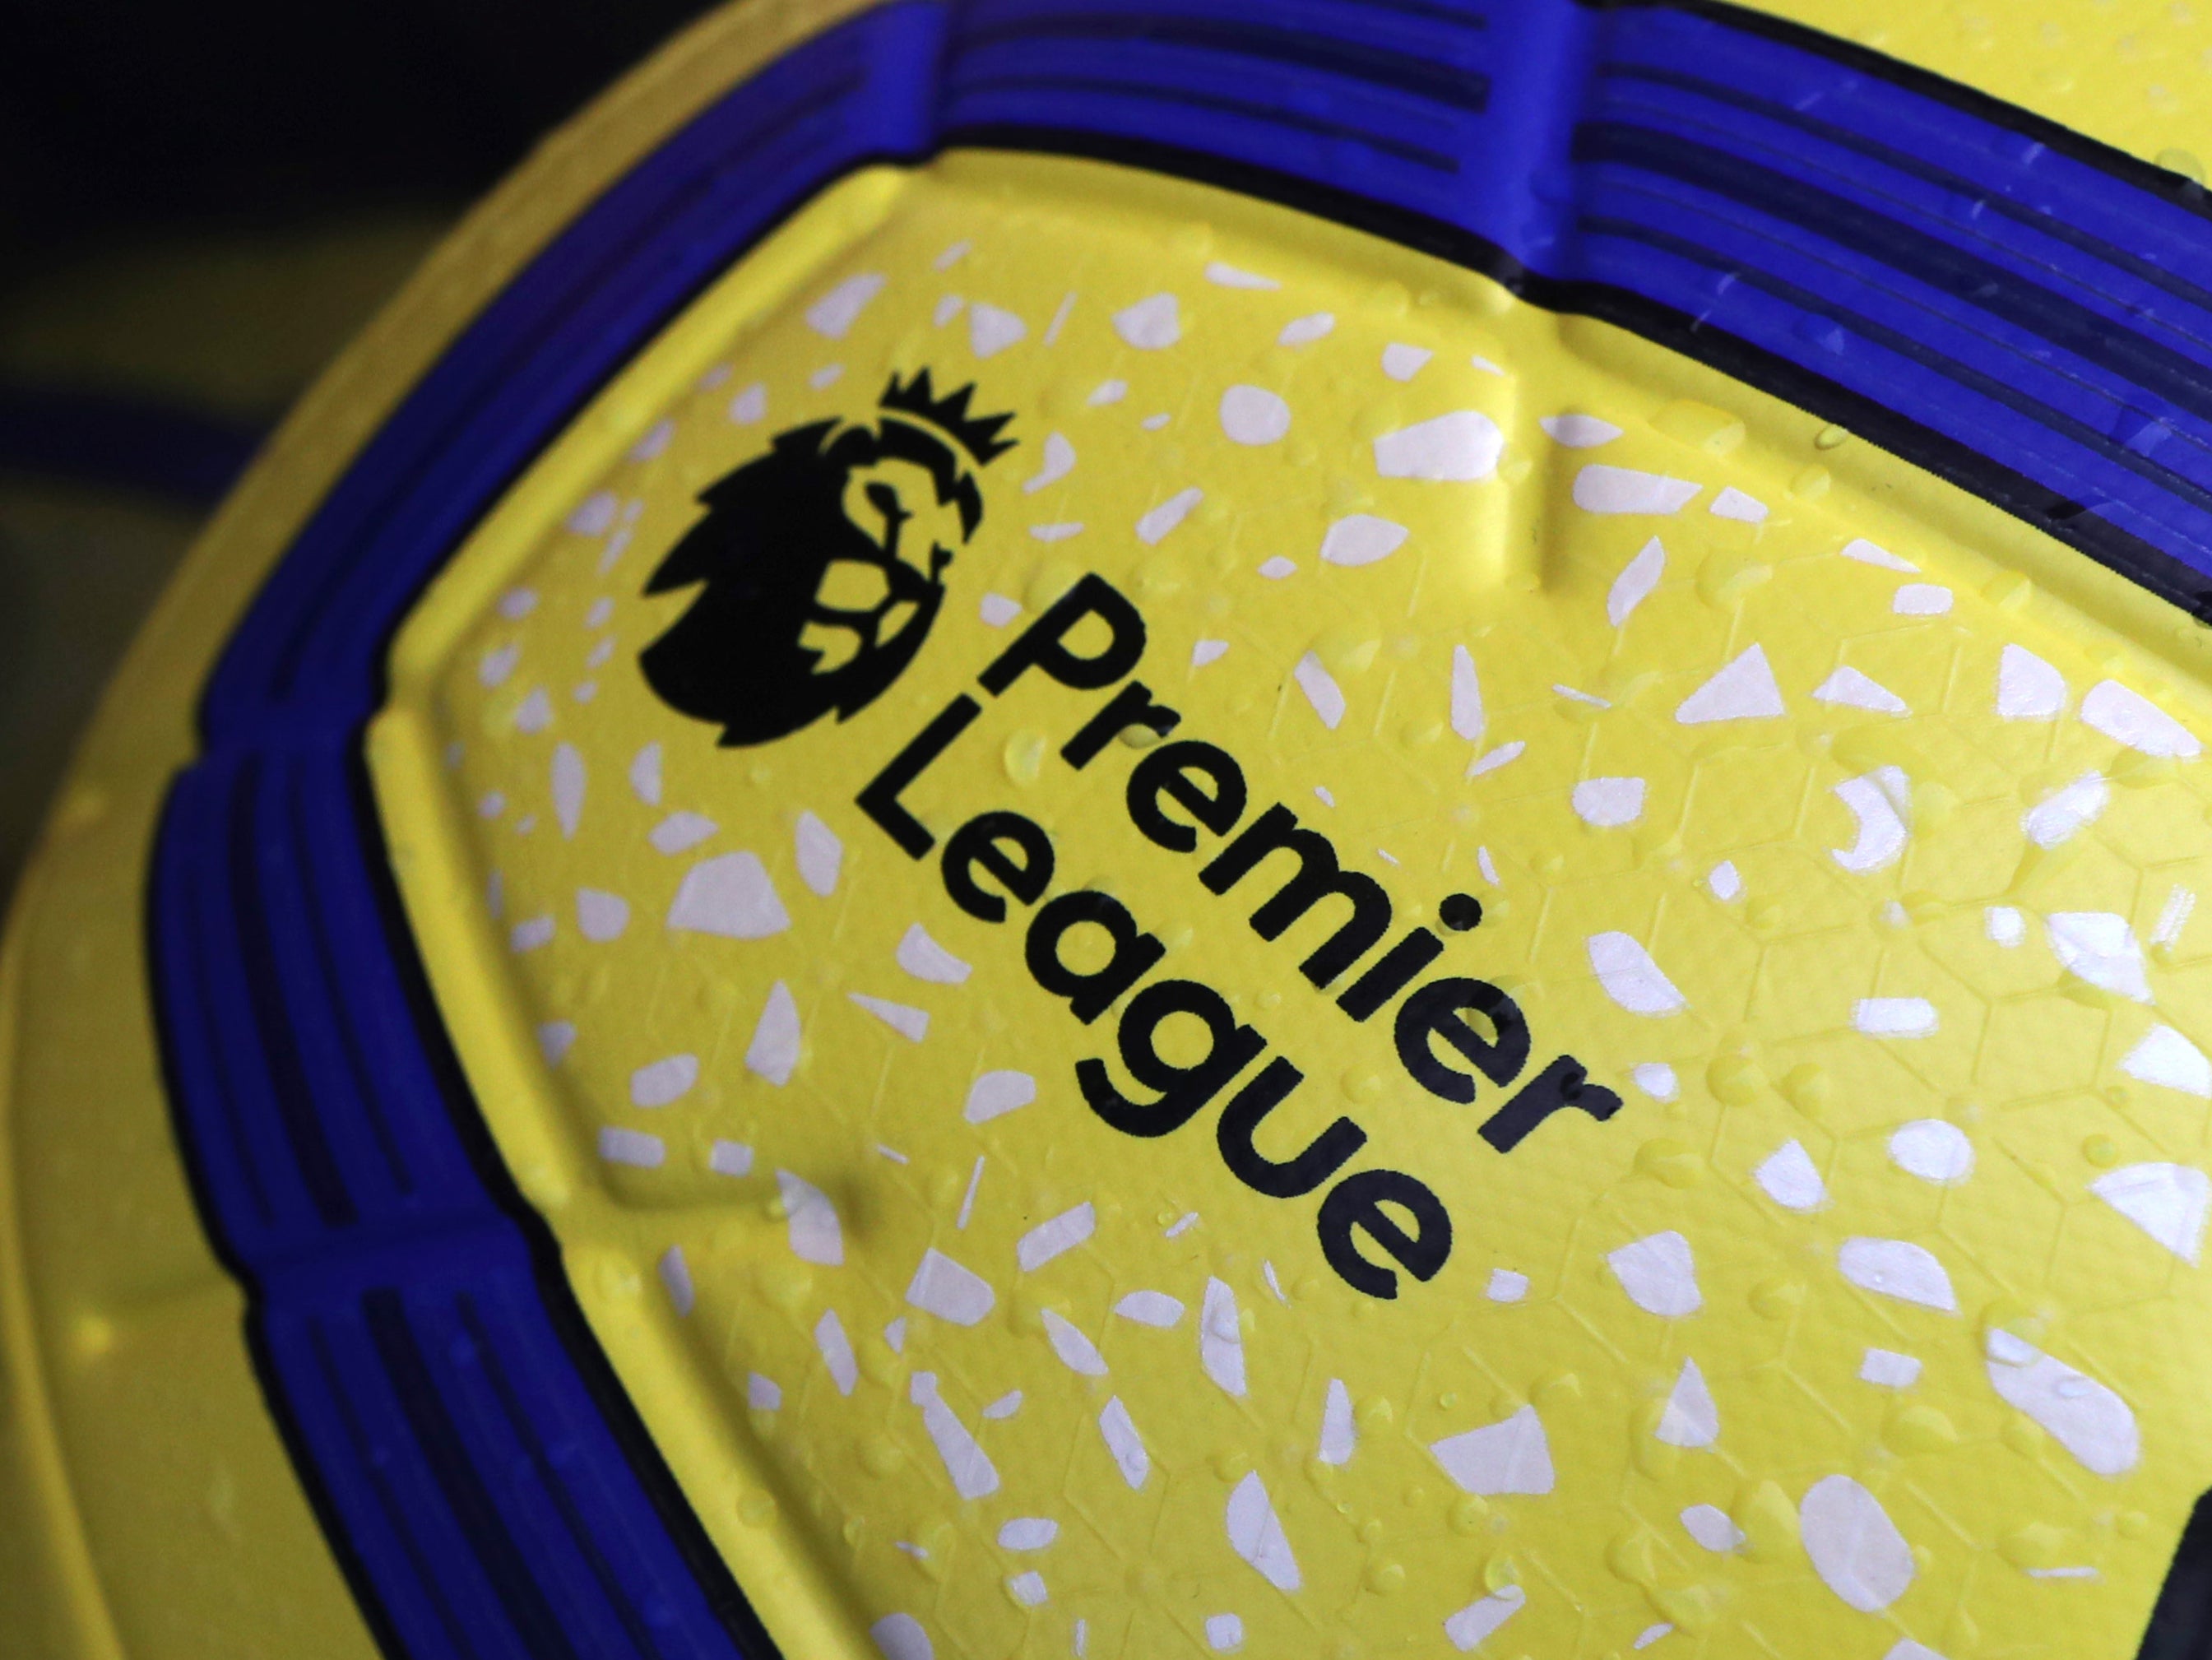 The subject was discussed at length in Tuesday’s Premier League shareholders’ meeting